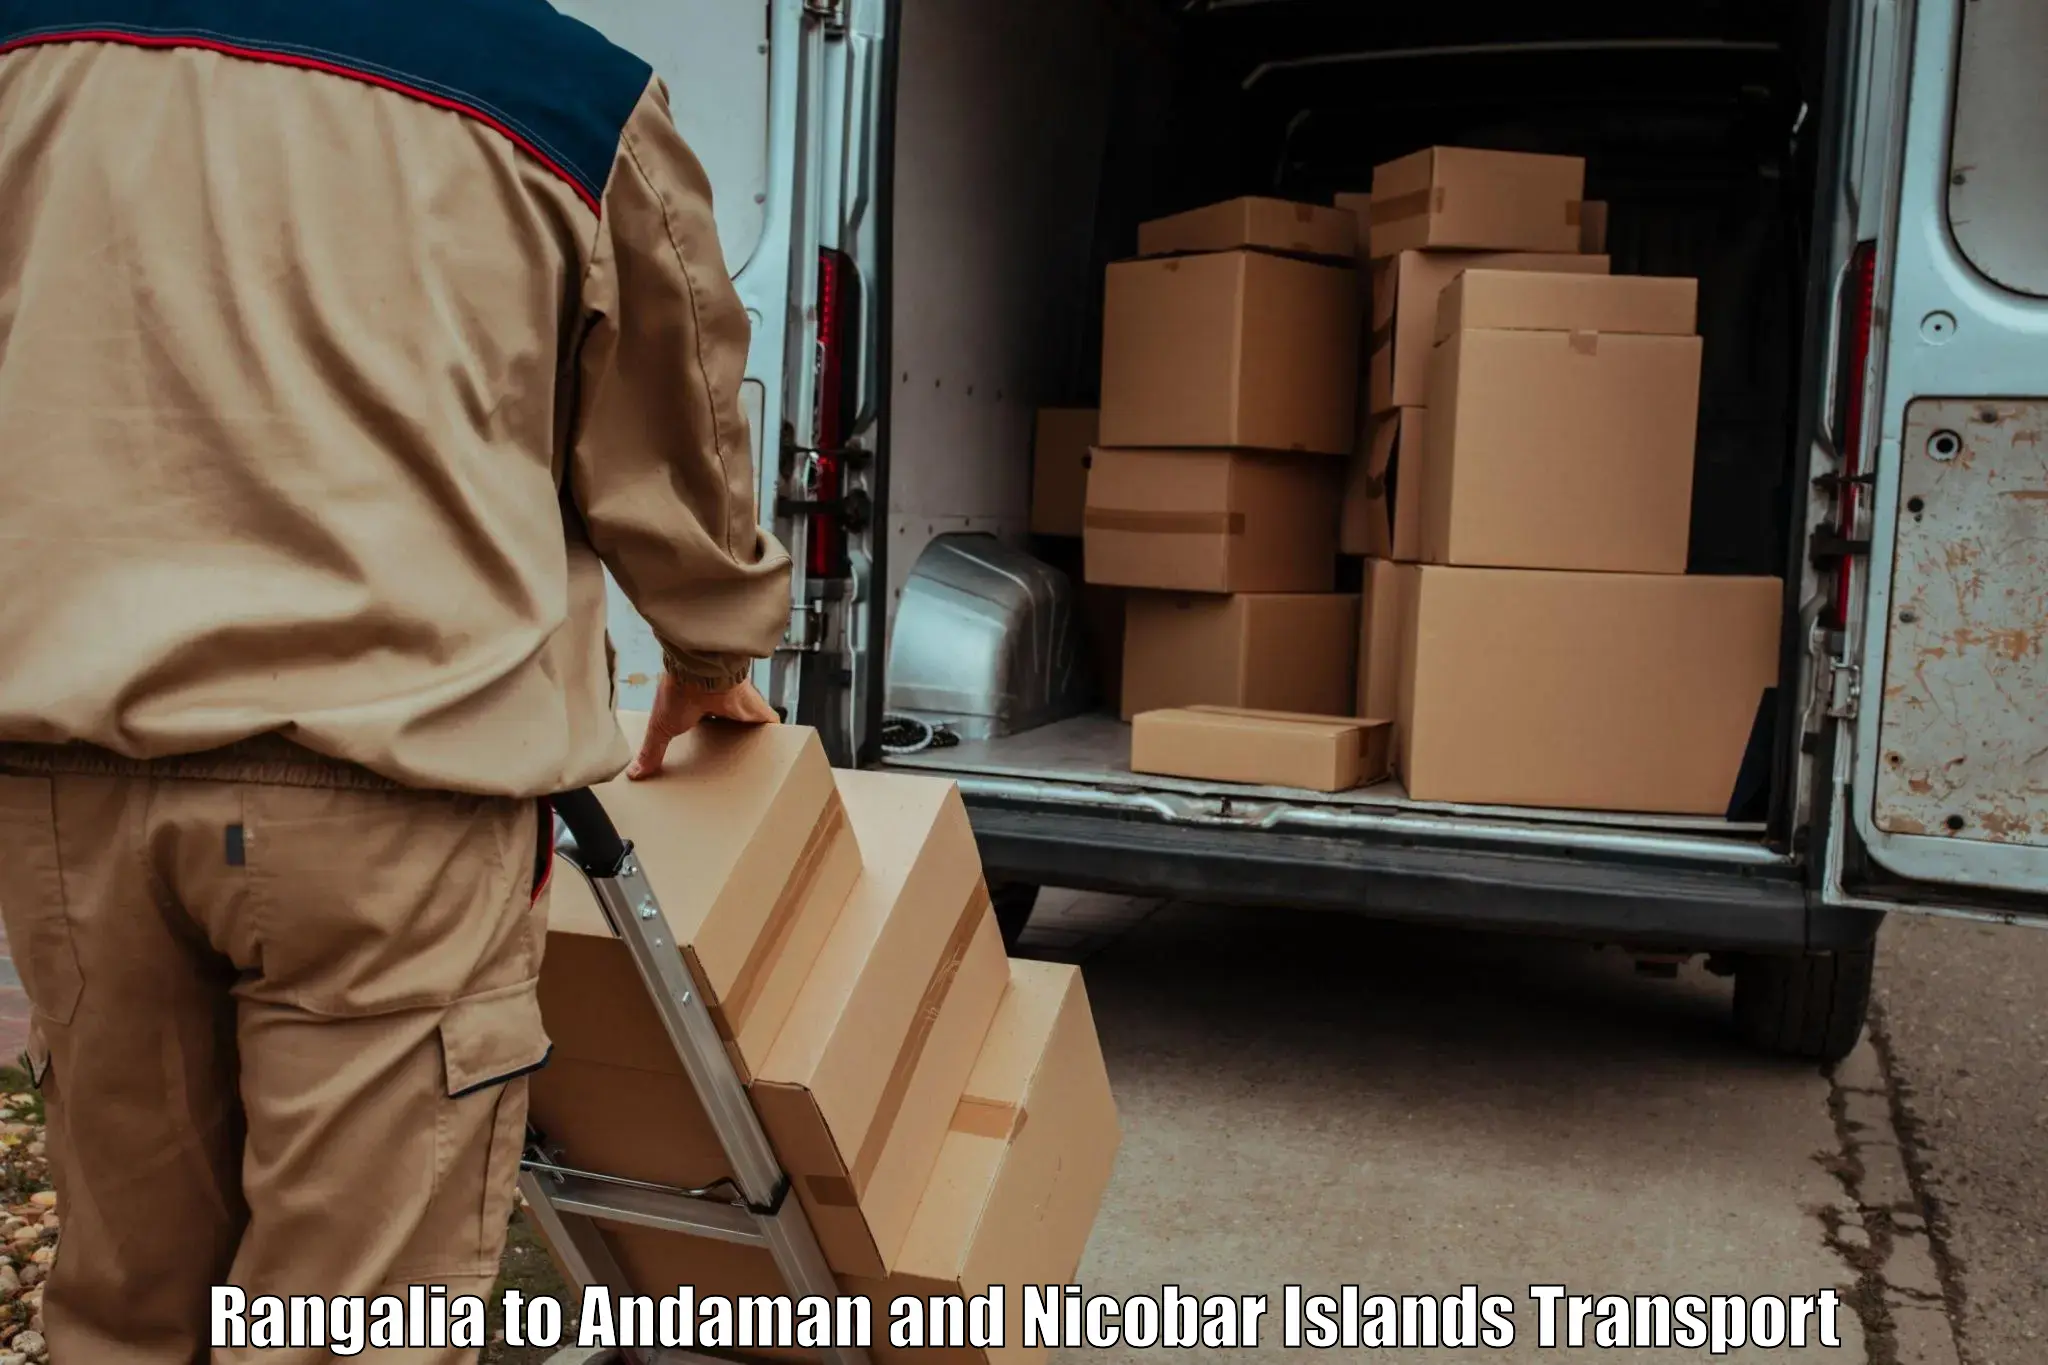 Furniture transport service Rangalia to North And Middle Andaman